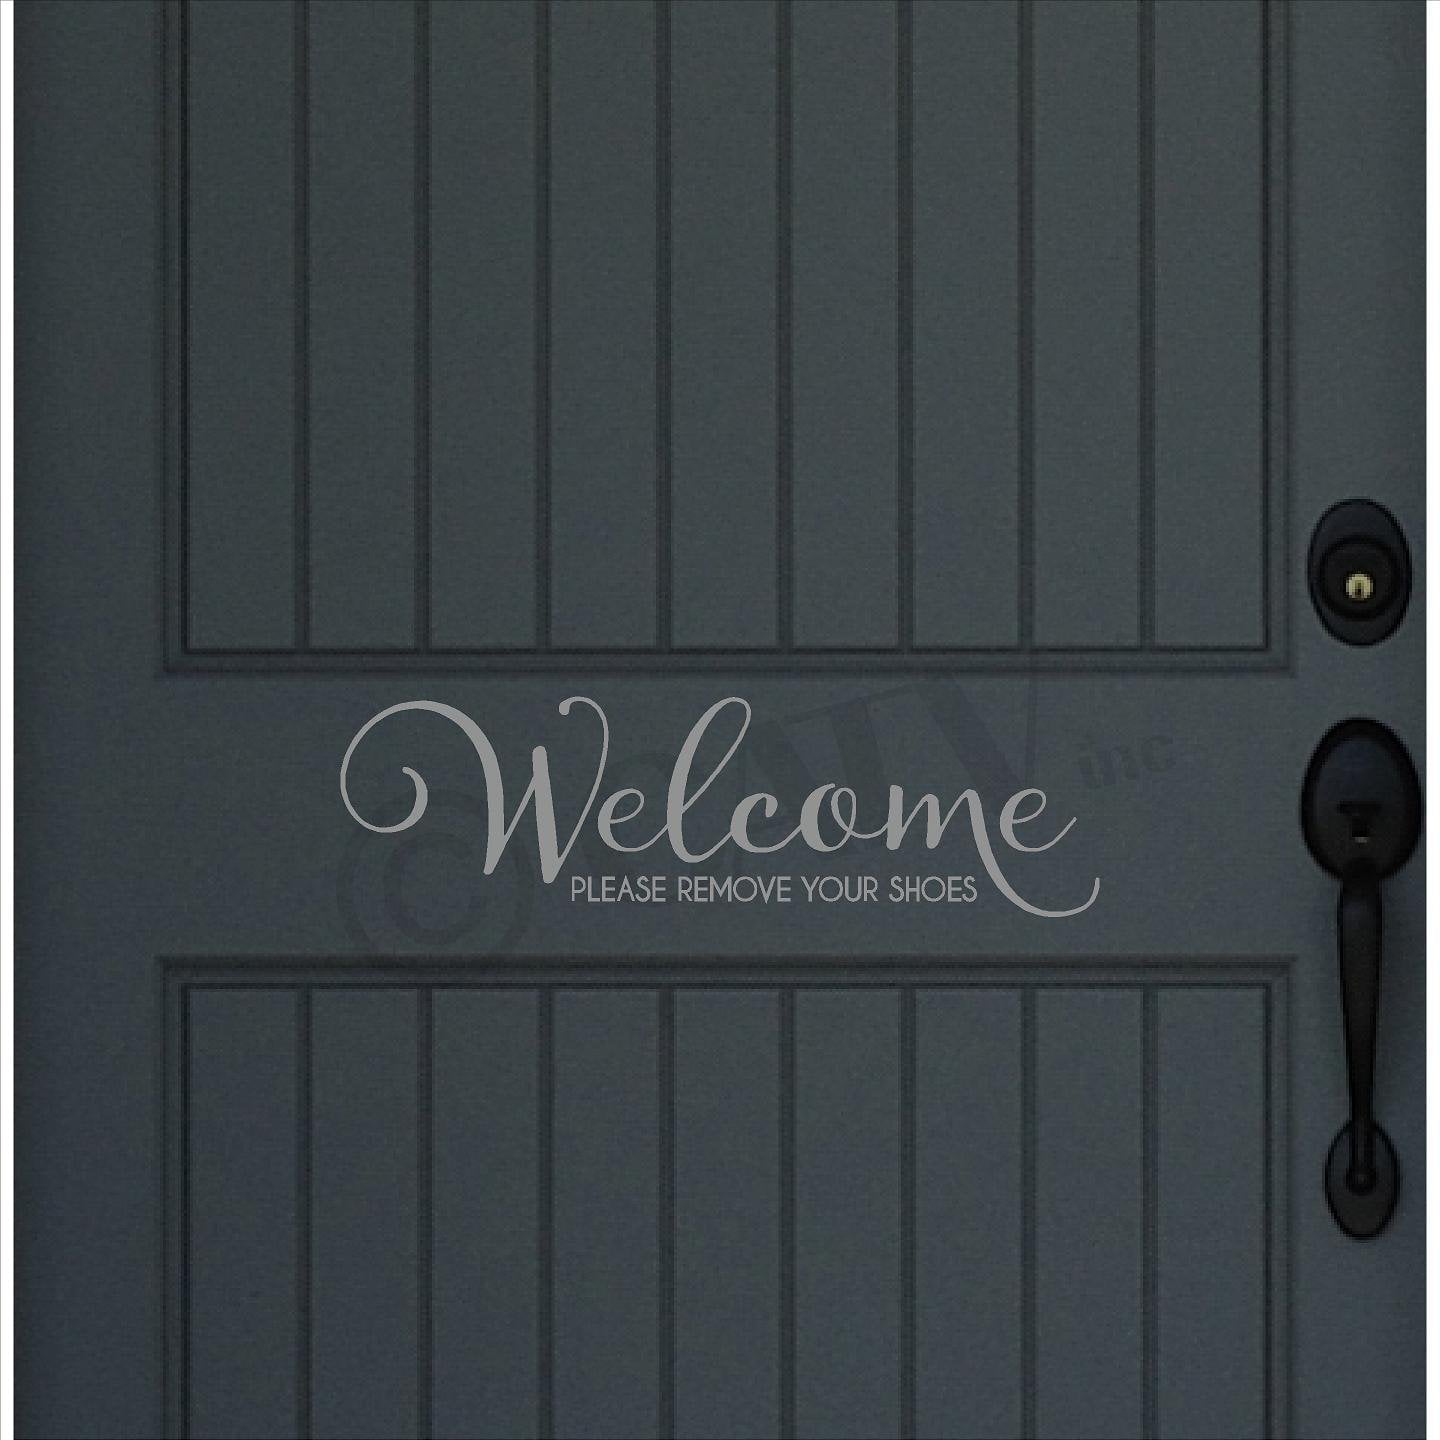 Metallic Gold Welcome.Please Remove Your Shoes Vinyl Wall Decal 